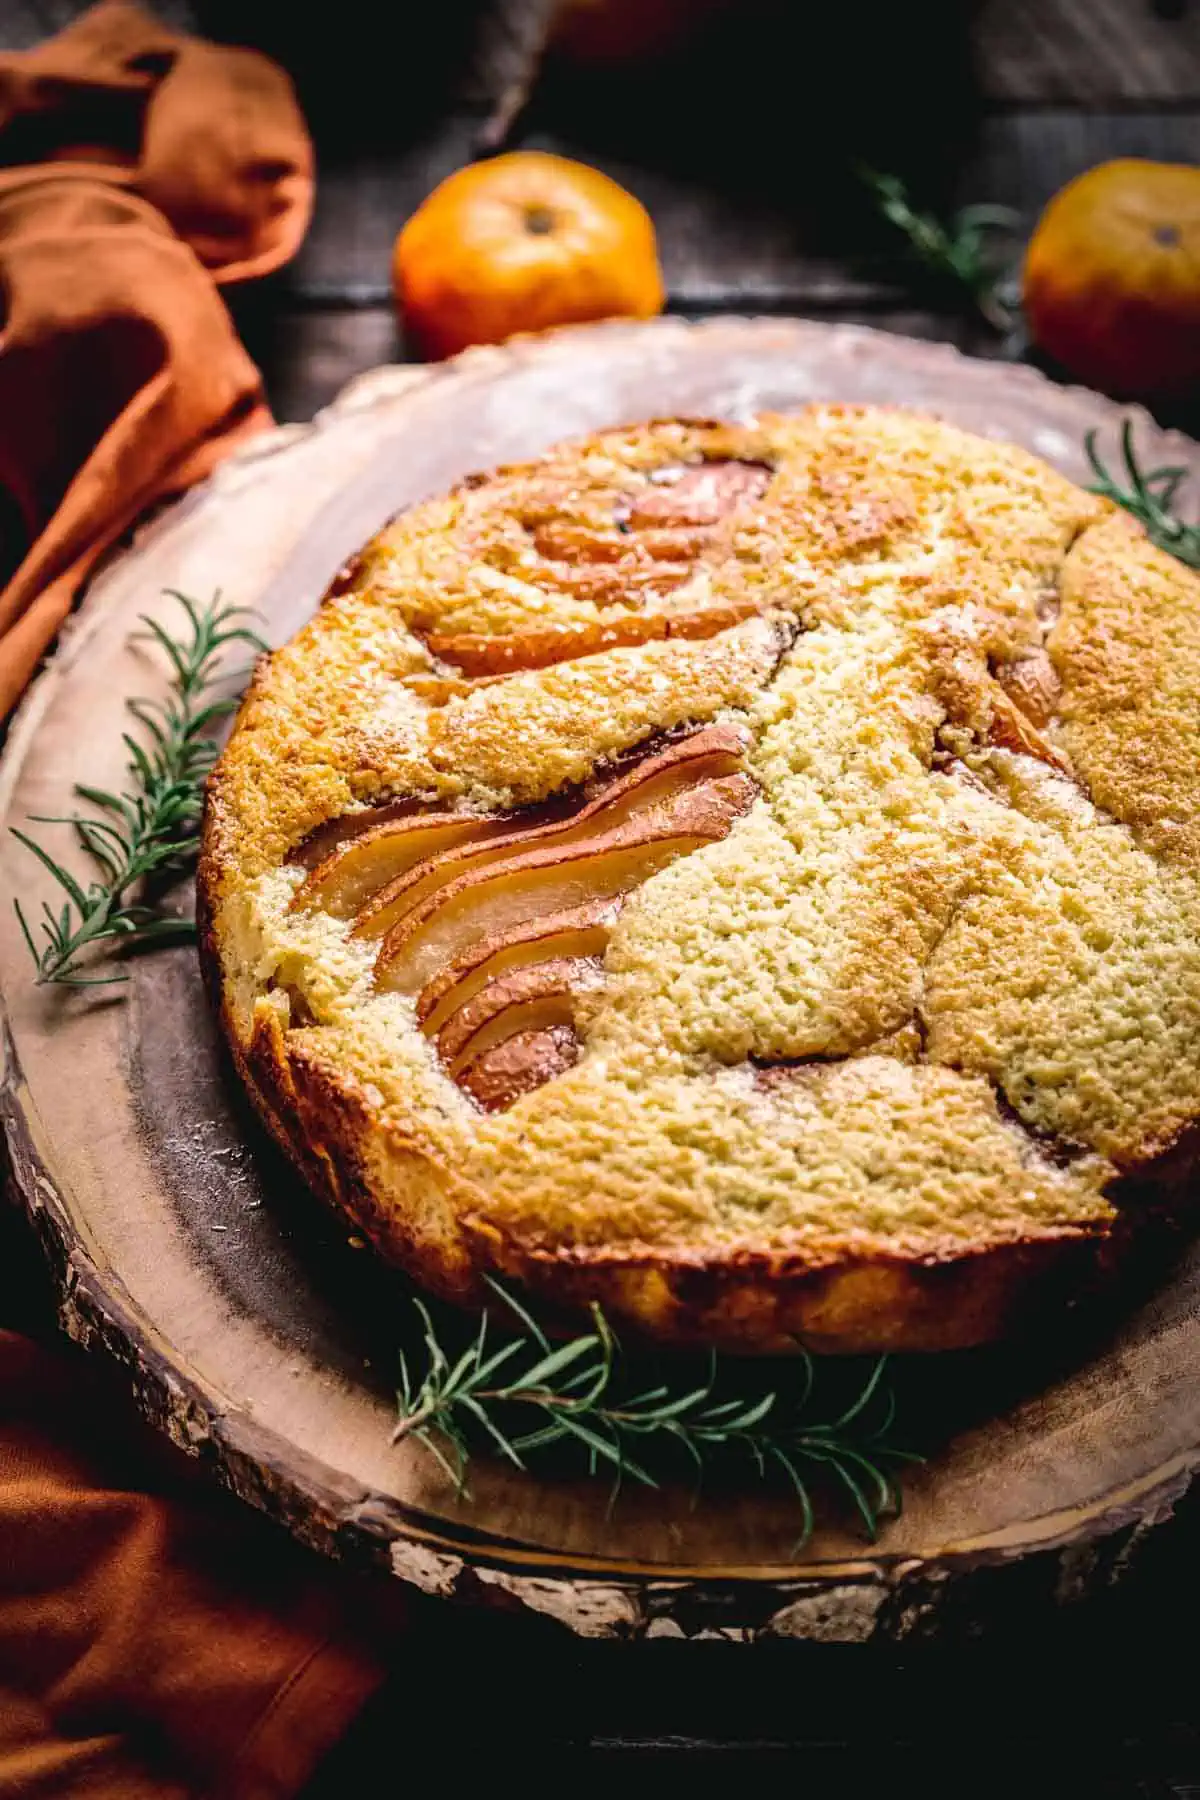 Italian ricotta cake with pears and sprigs of rosemary on a wood slab.